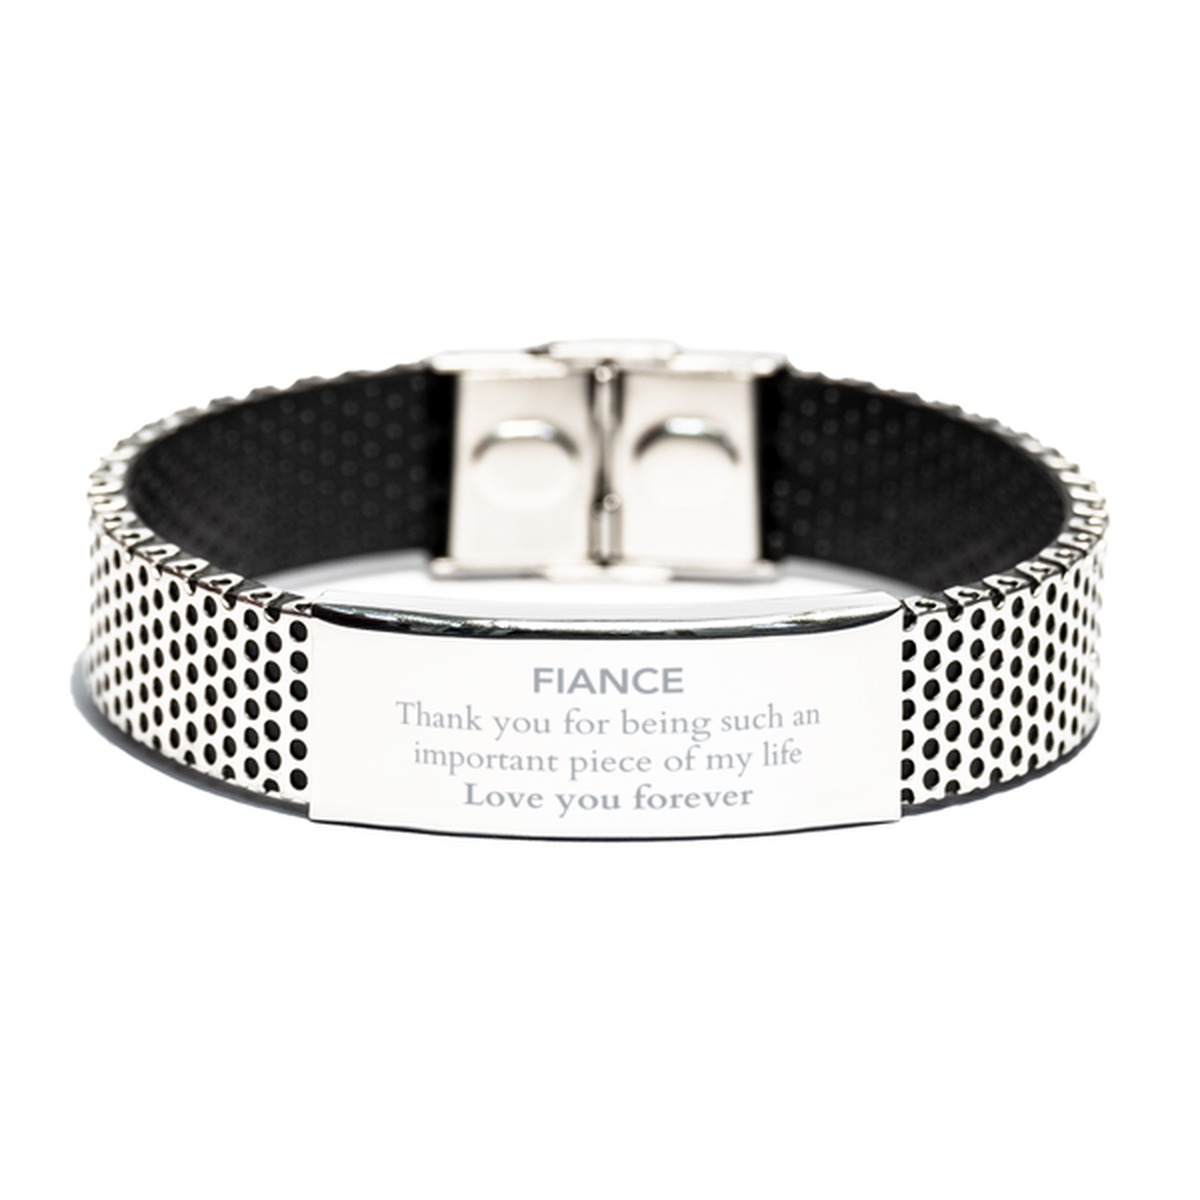 Appropriate Fiance Stainless Steel Bracelet Epic Birthday Gifts for Fiance Thank you for being such an important piece of my life Fiance Christmas Mothers Fathers Day